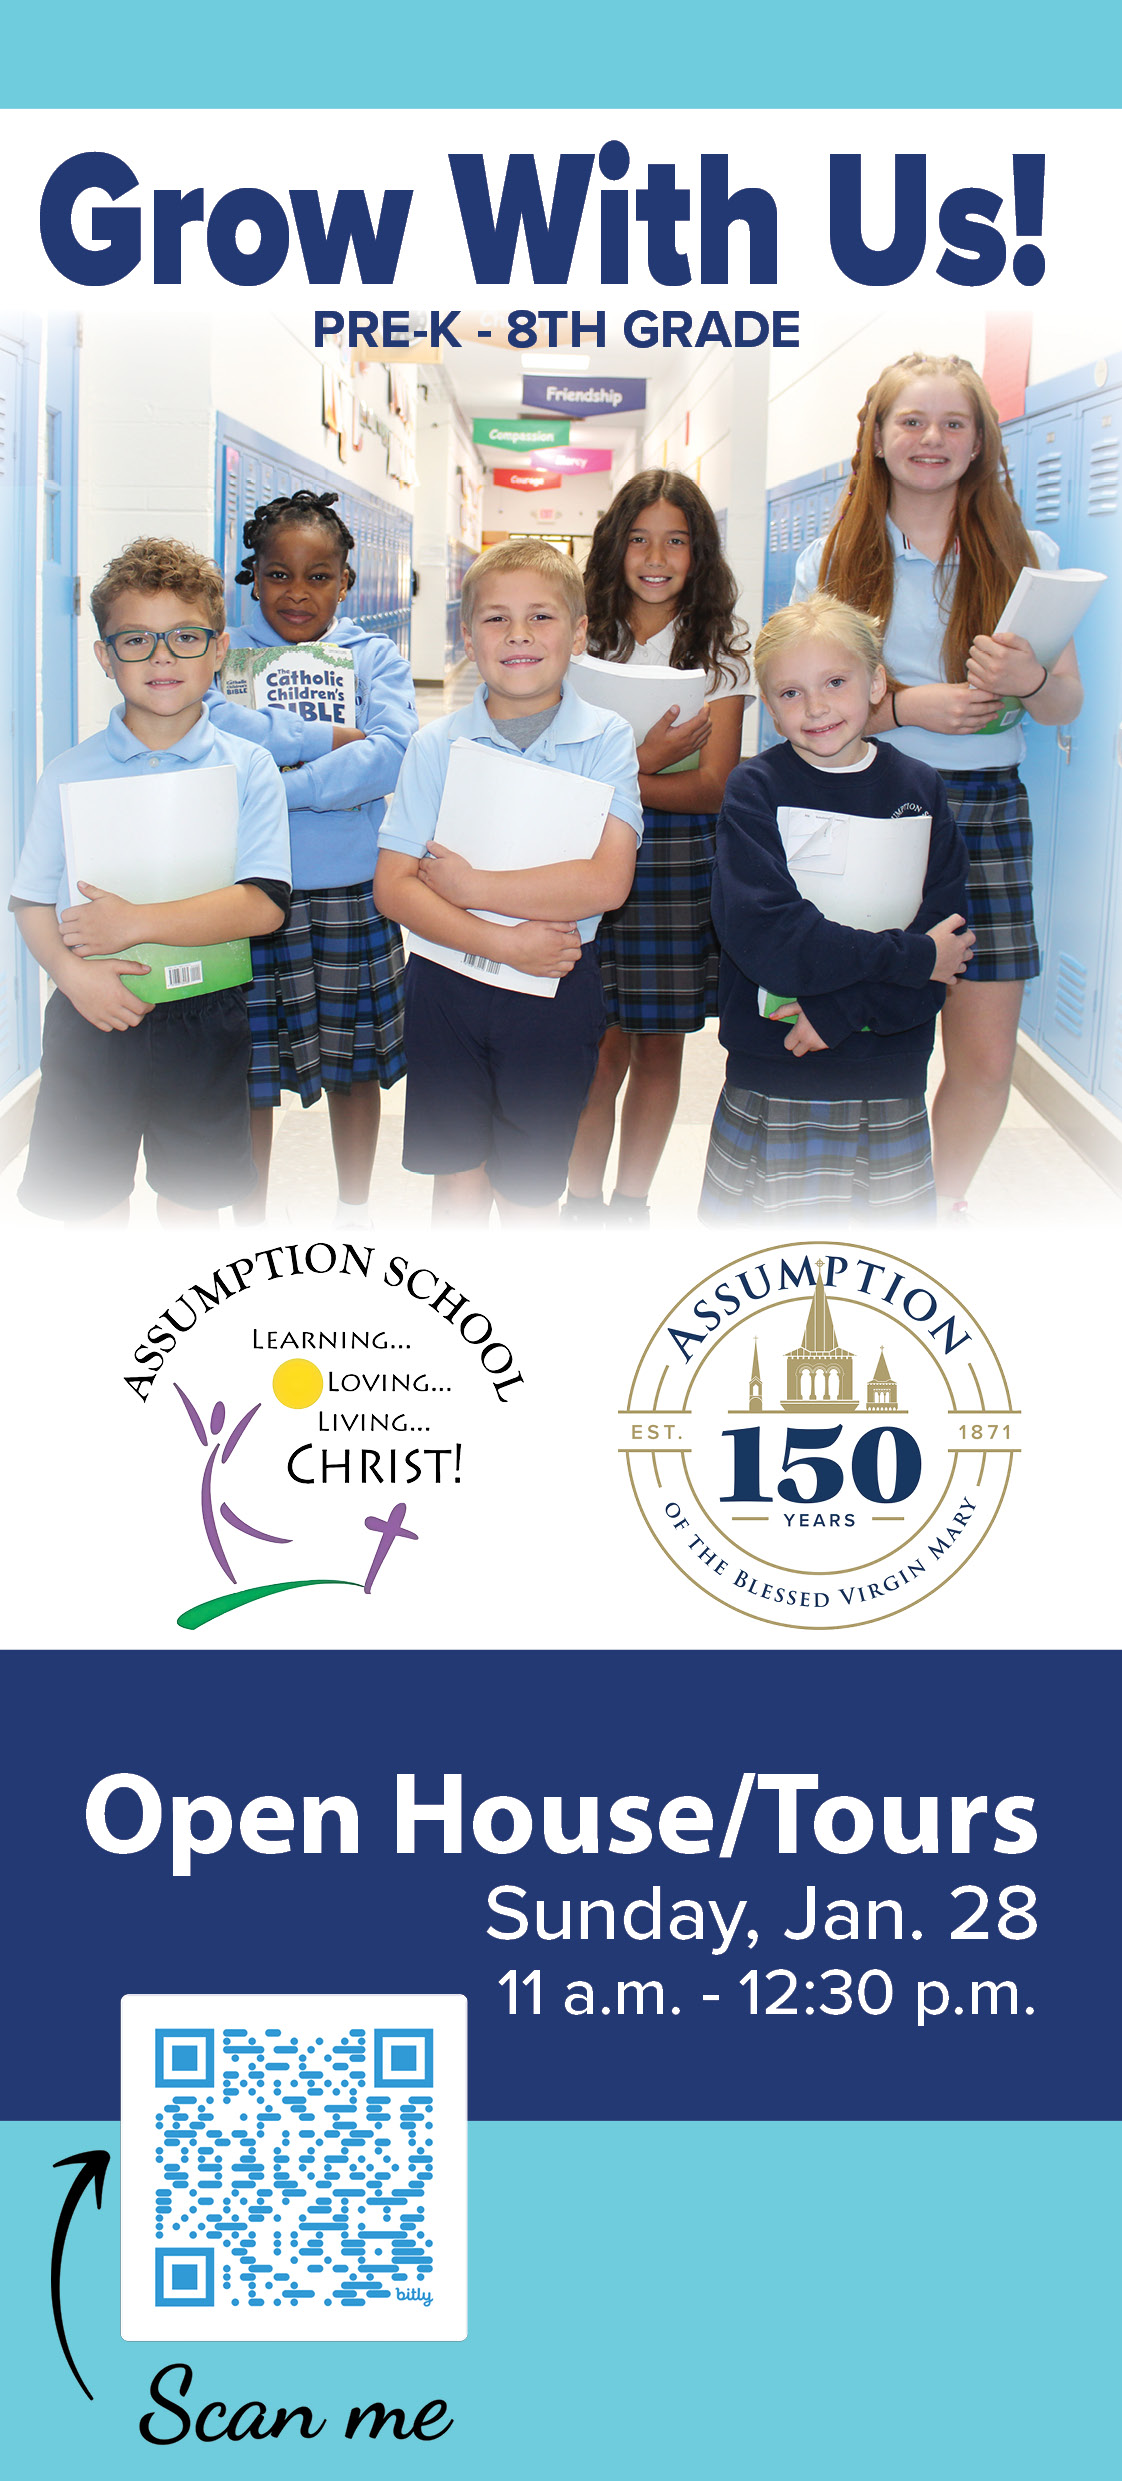  Assumption School offers a faith-based, private school education with smaller classroom sizes and tuition assistance.